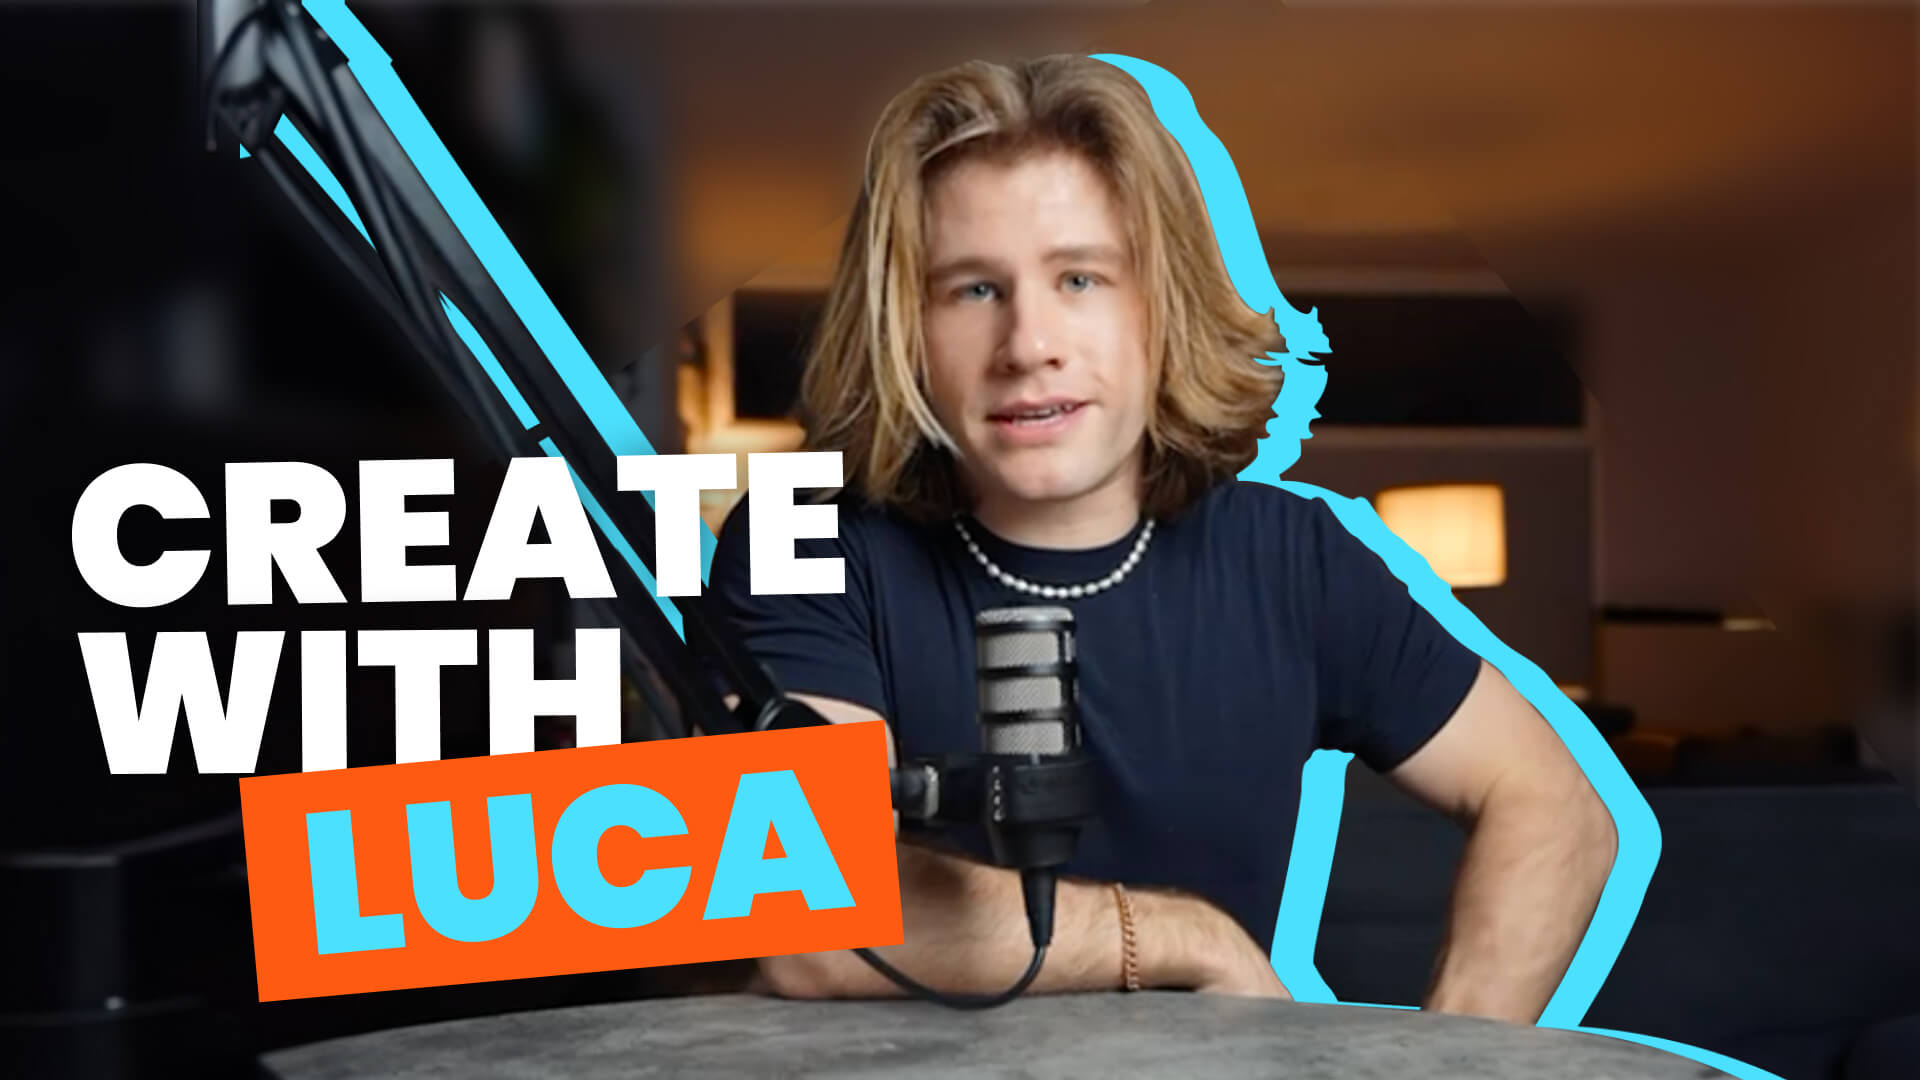 CREATE WITH LUCA